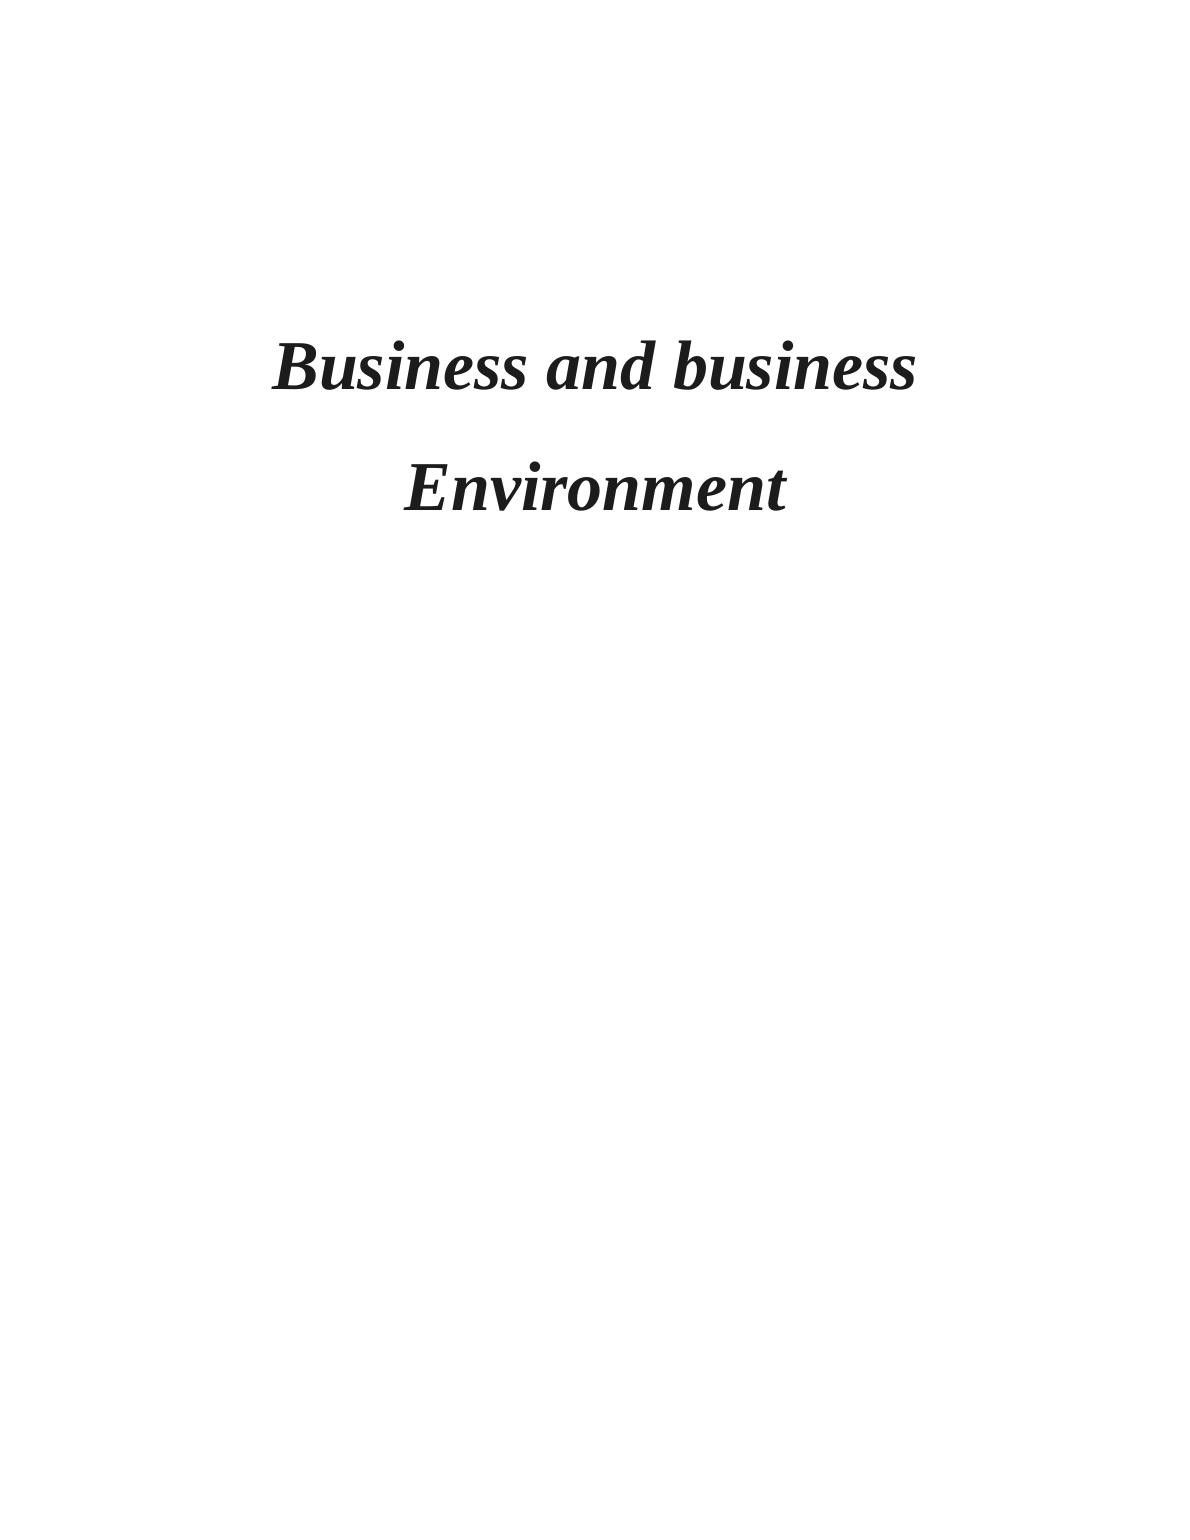 Business and Business Environment INTRODUCTION 1 TASK 11 Different types size and scope of organisation. 5 The relationship between organisation objectives and structure_1